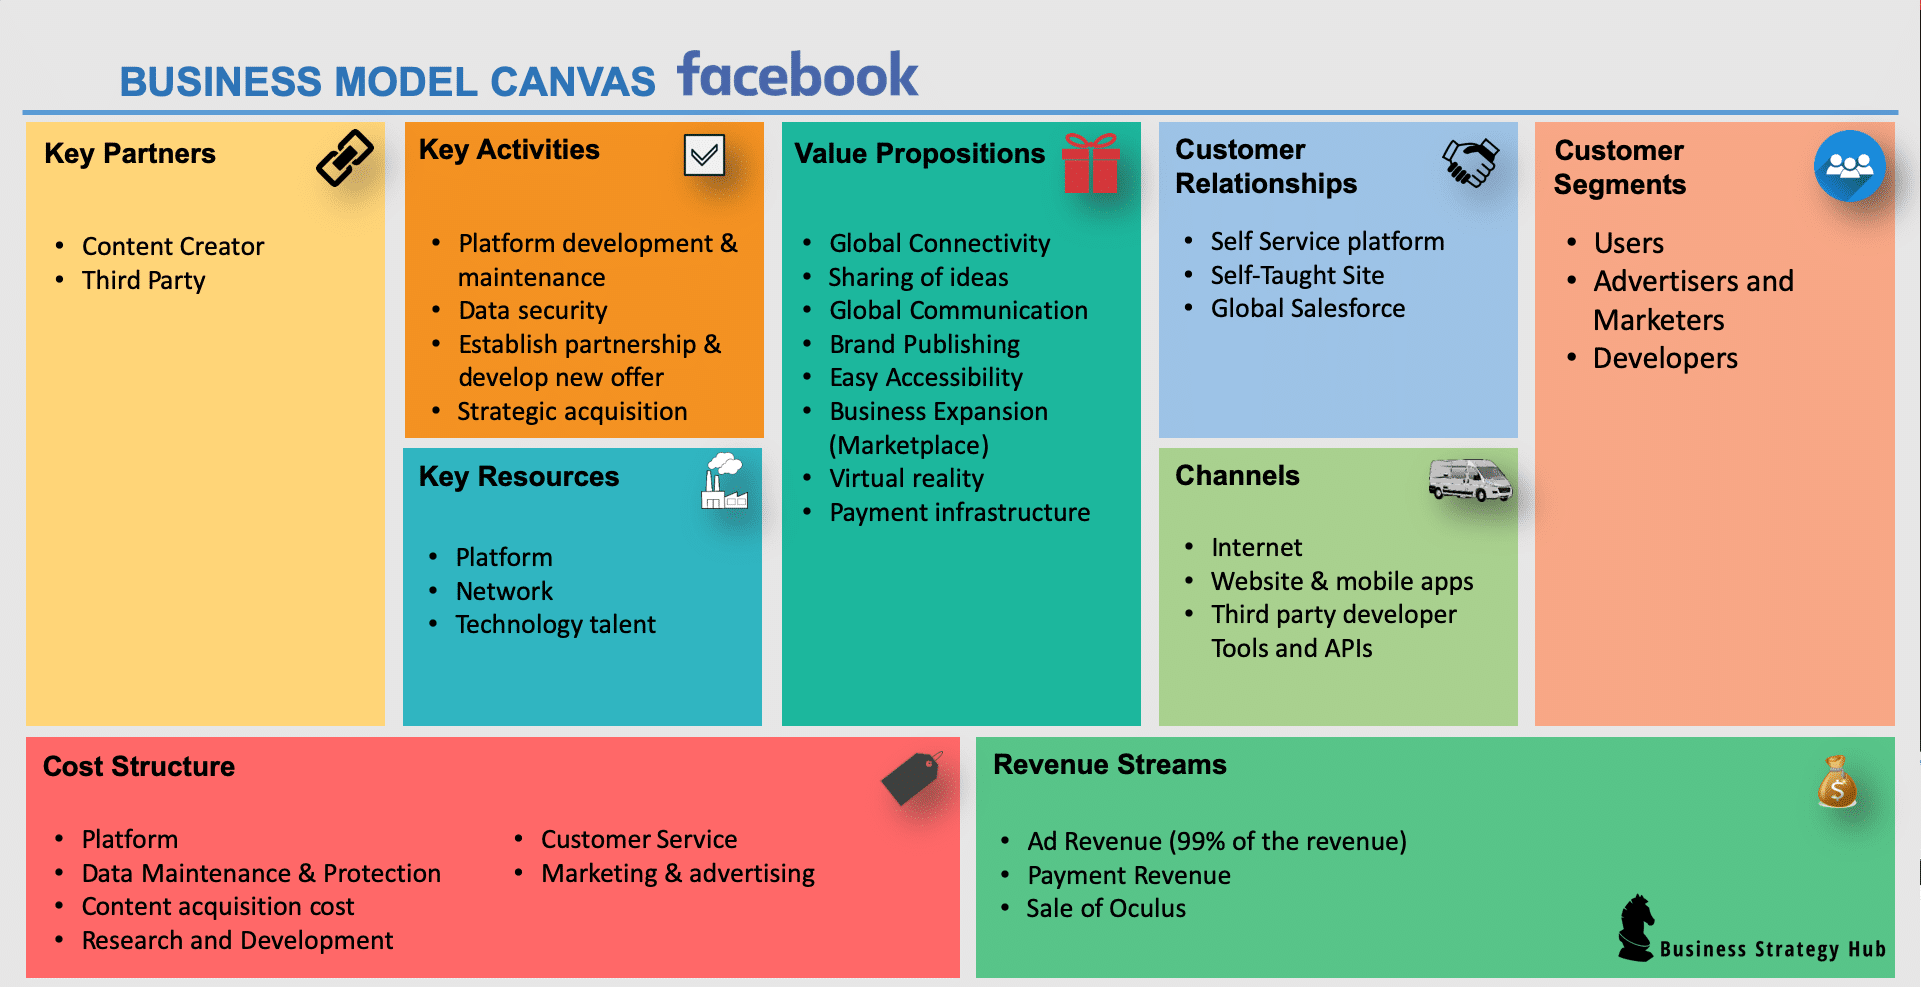 Business and Revenue Model of Canva